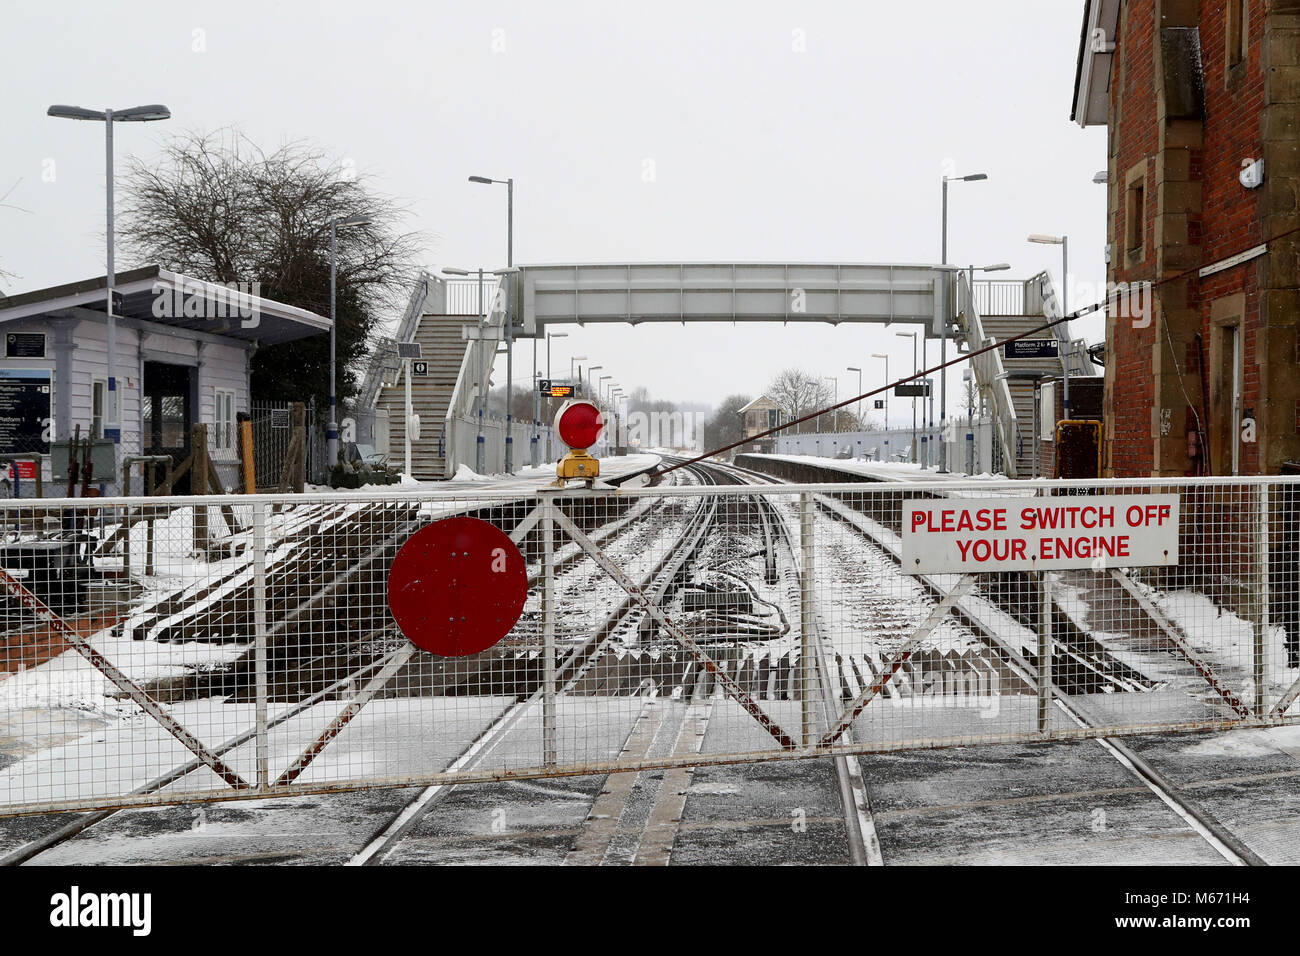 Wye railway station near Ashford, Kent, which is one of over 50 stations closed to passengers on the Southeastern rail network following heavy snowfall which has caused disruption across Britain. Stock Photo